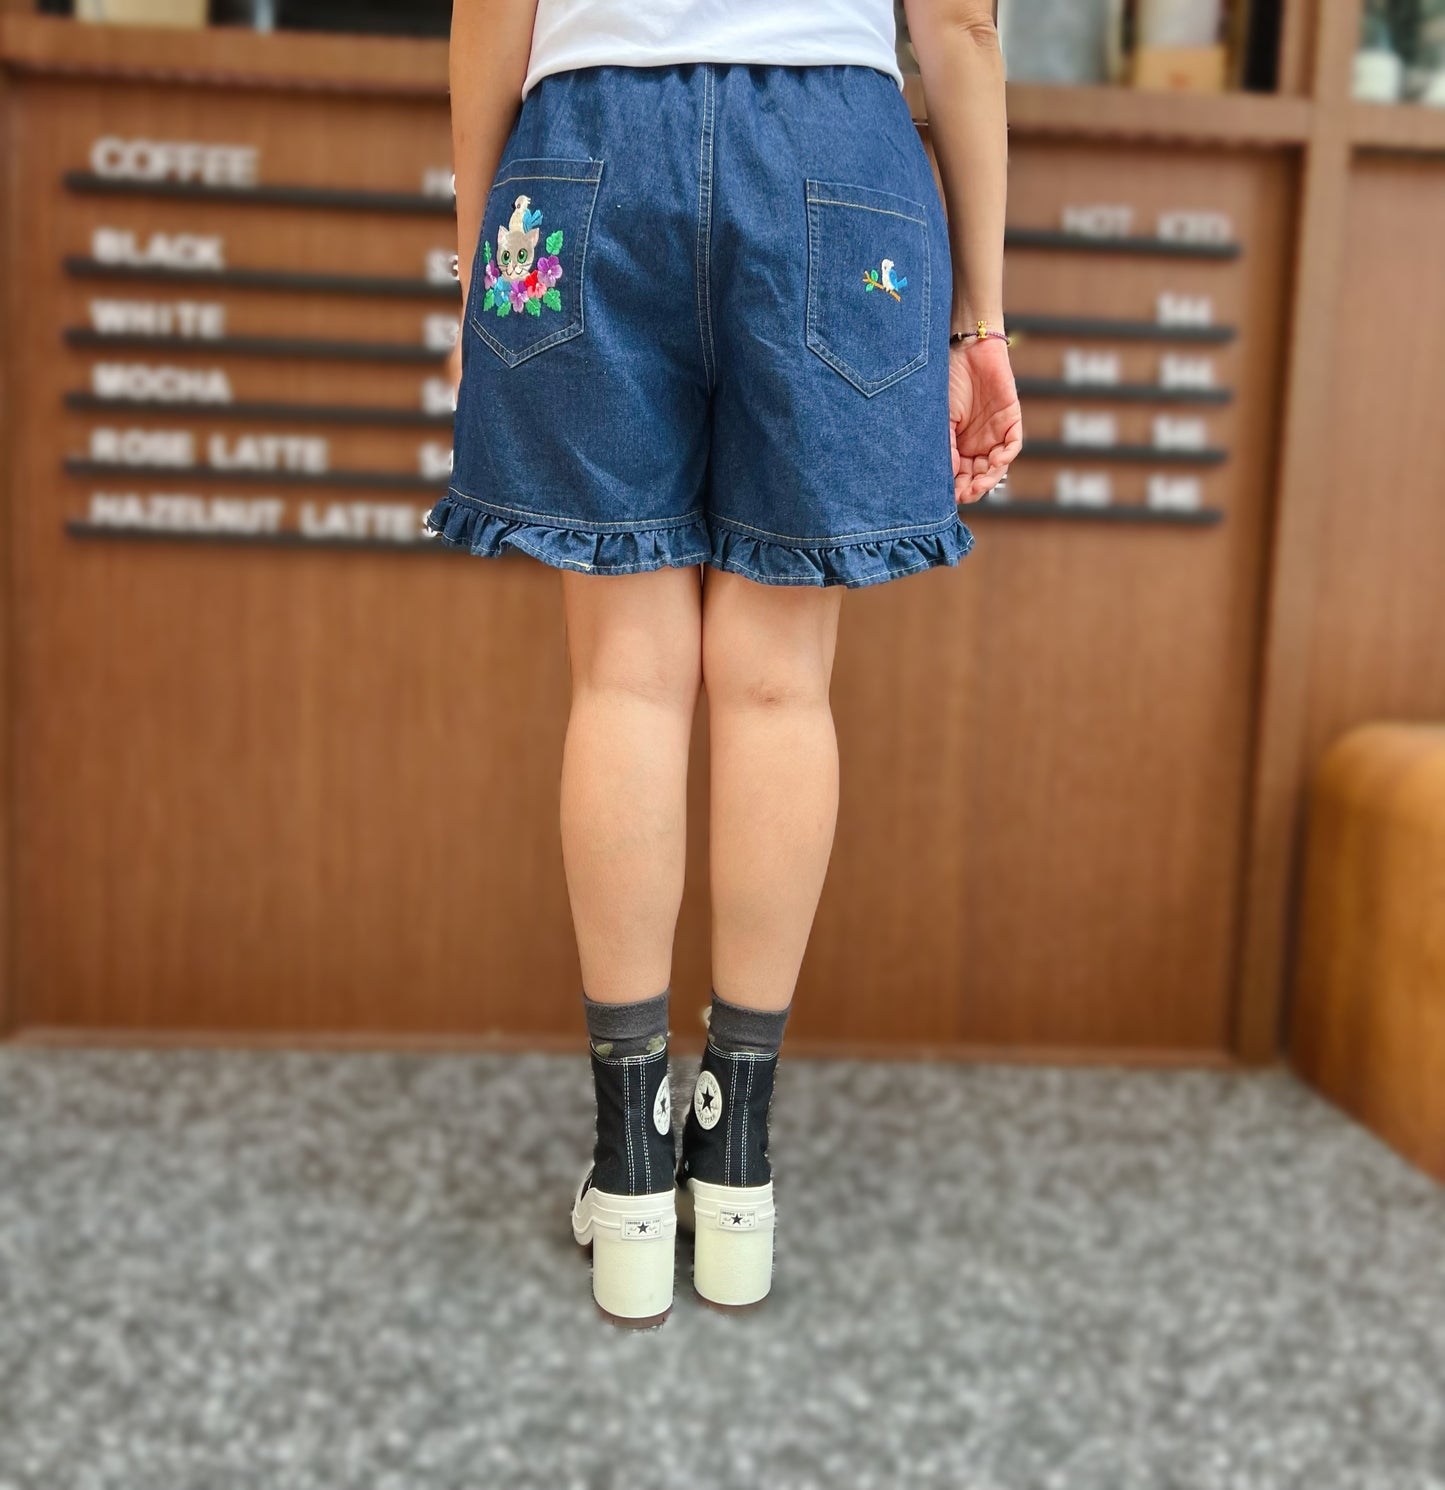 Cats and birds embroidery denim short pants